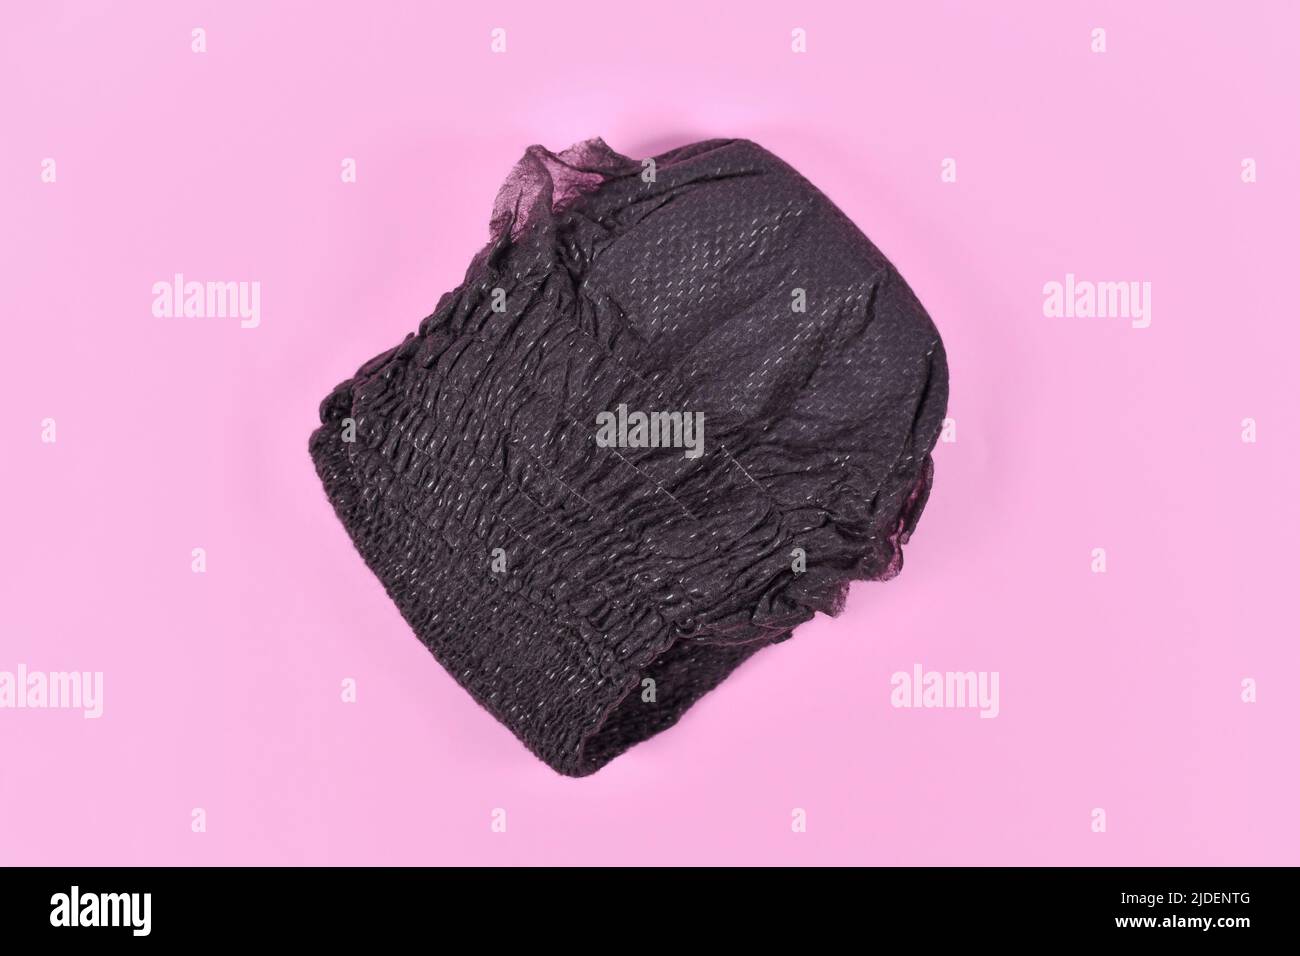 Black folded diaper for adult women on pink background Stock Photo